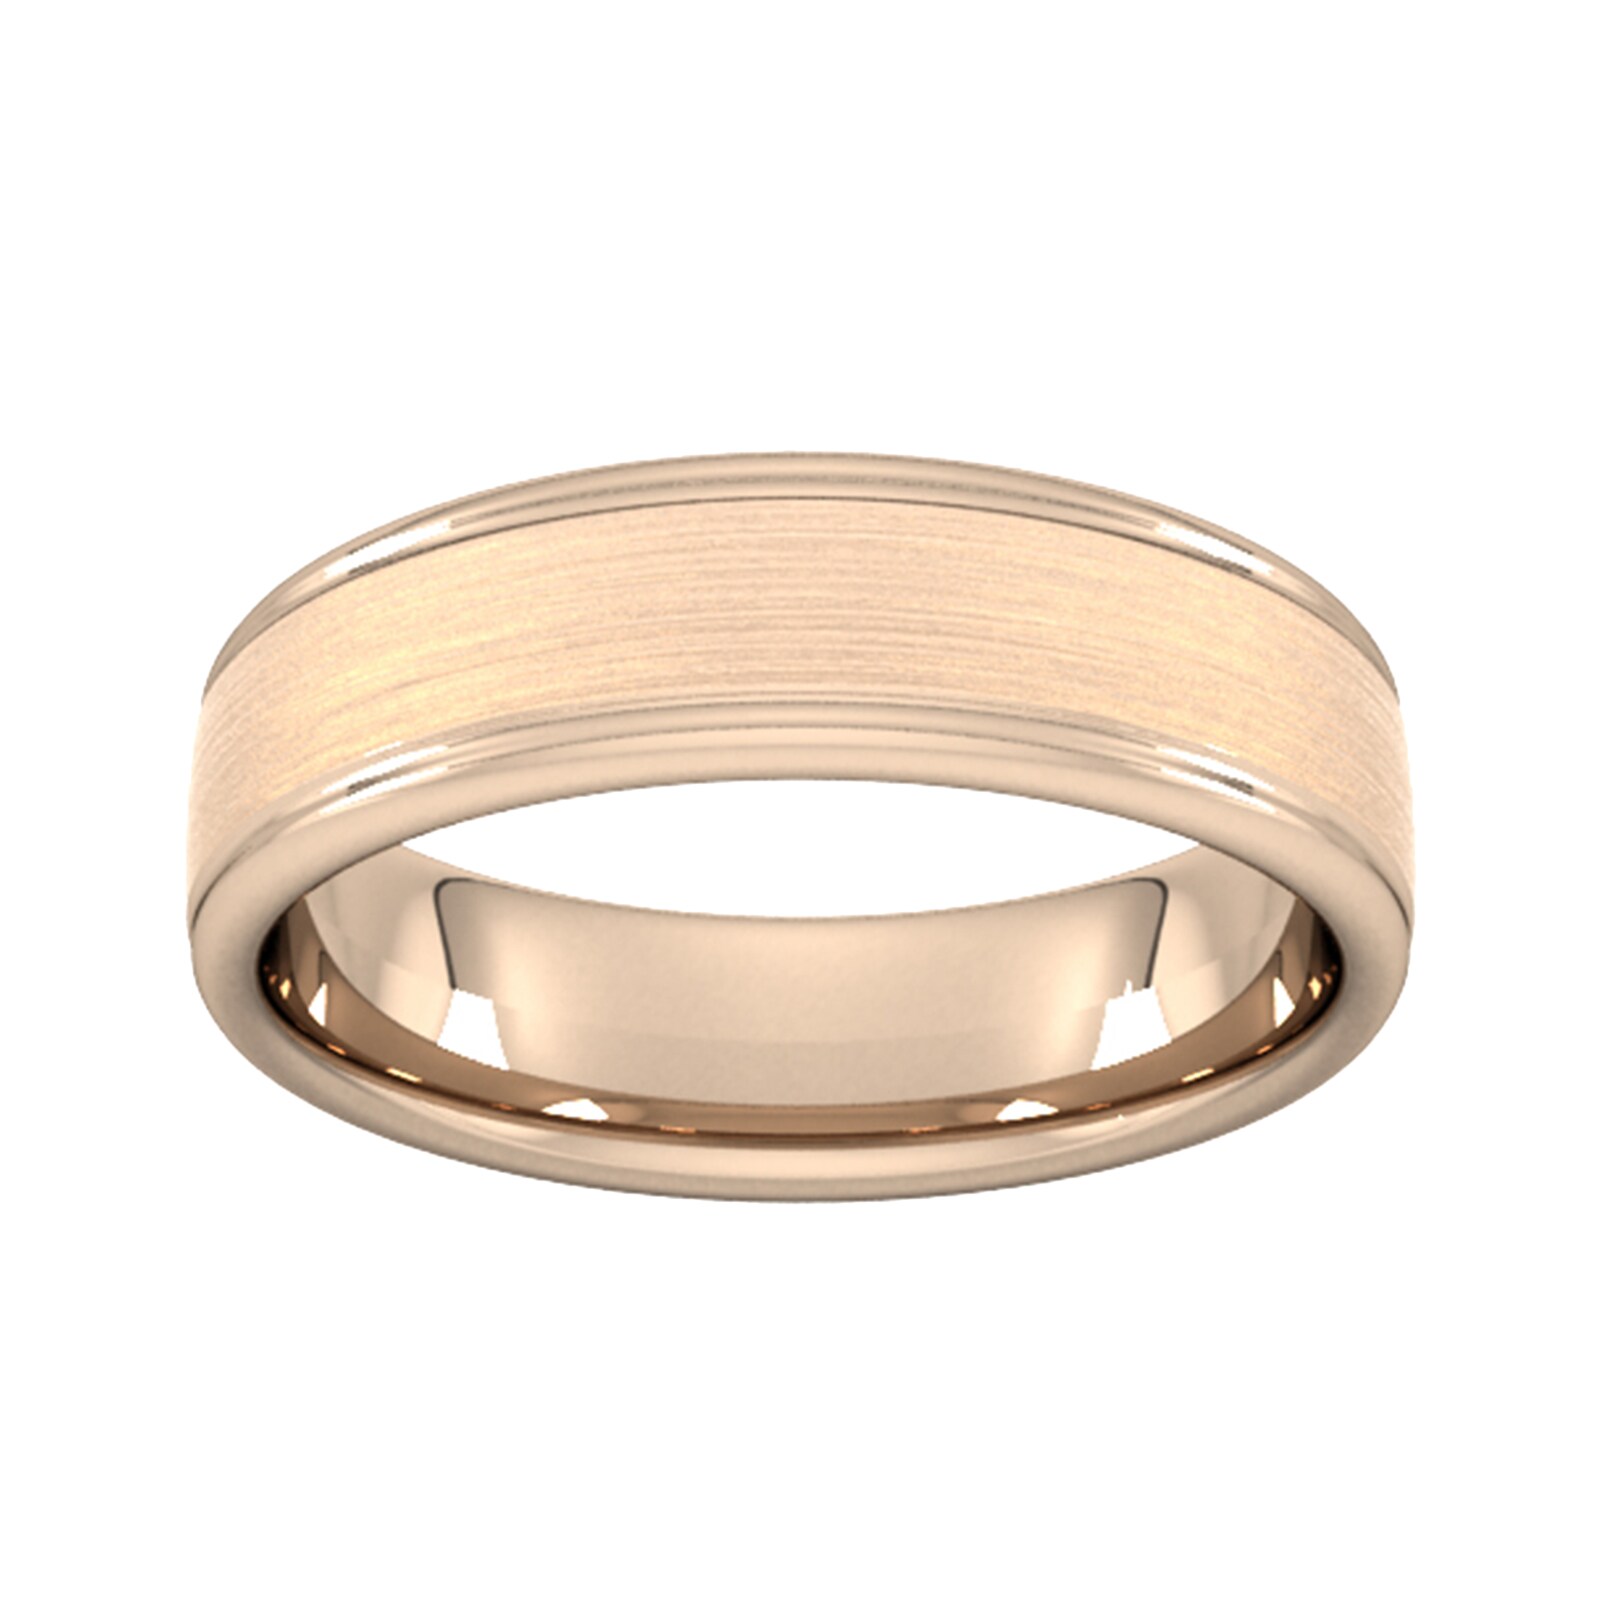 6mm Slight Court Heavy Matt Centre With Grooves Wedding Ring In 18 Carat Rose Gold - Ring Size M